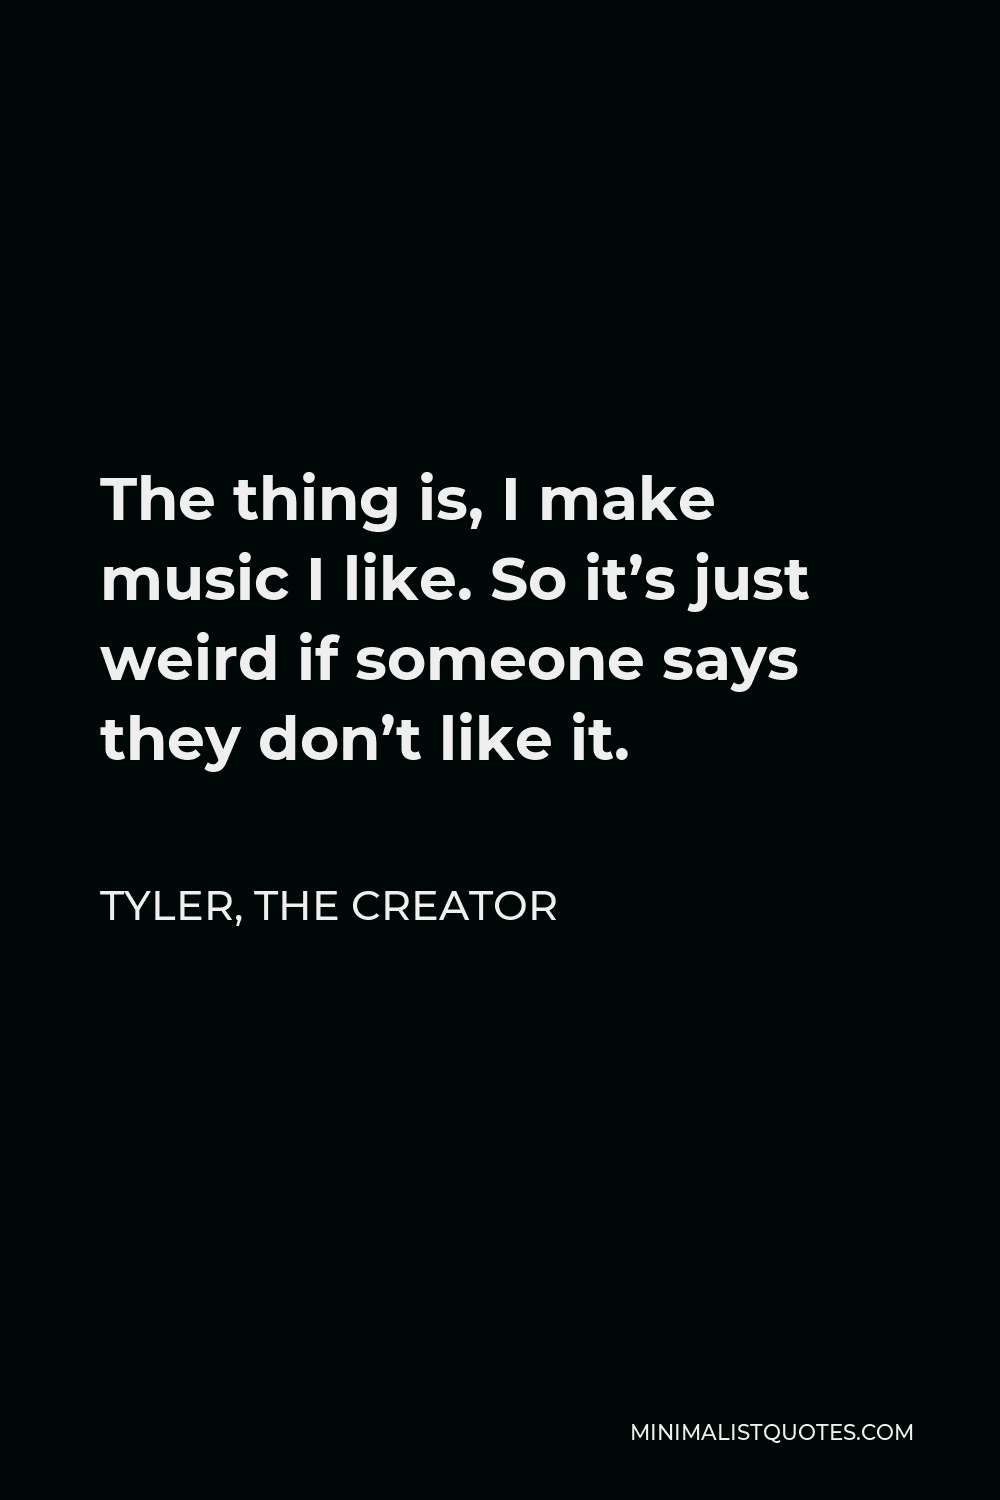 Tyler, the Creator Quote - The thing is, I make music I like. So it’s just weird if someone says they don’t like it.